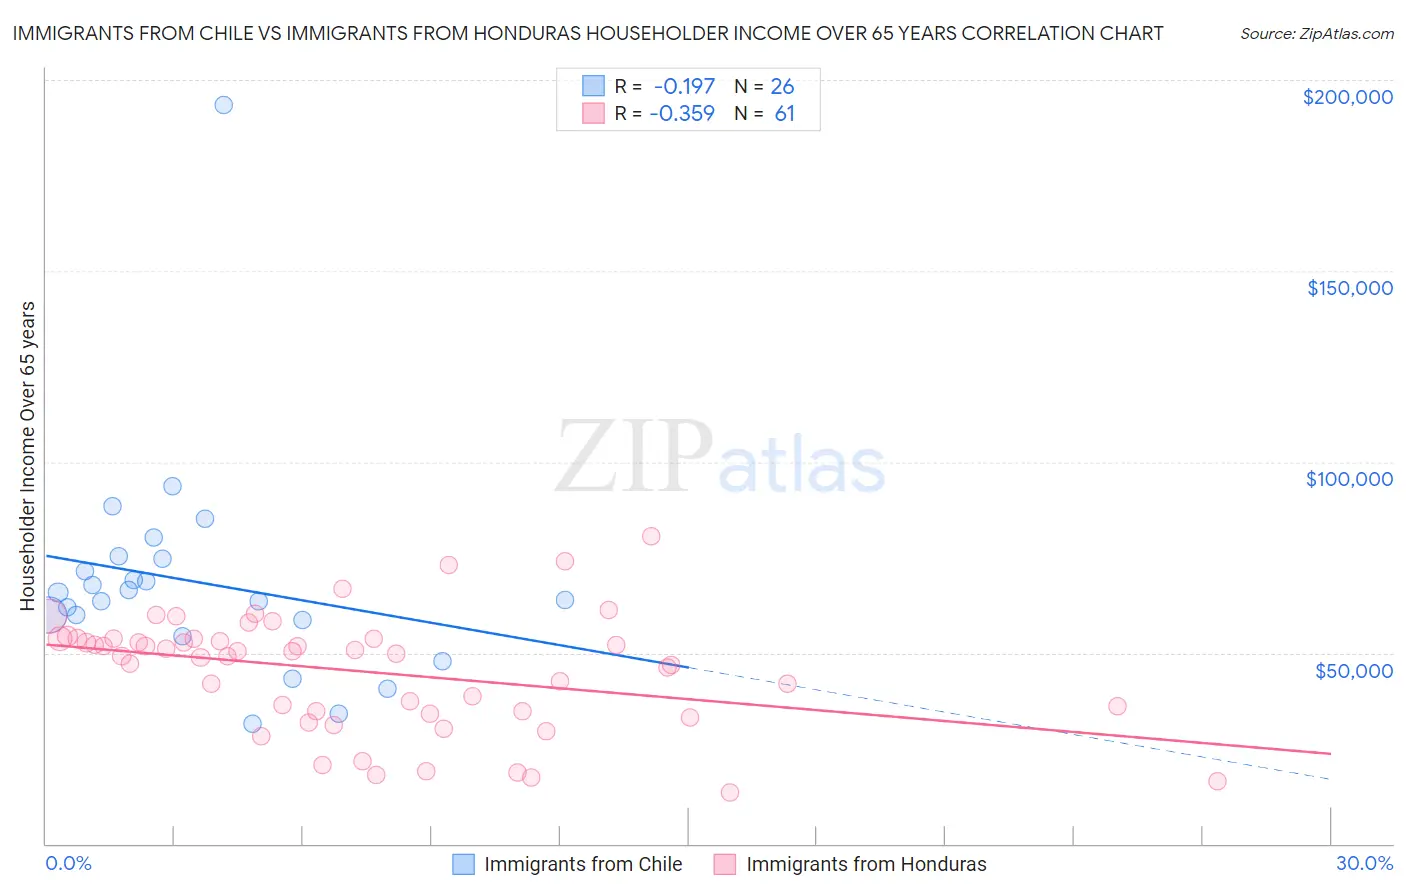 Immigrants from Chile vs Immigrants from Honduras Householder Income Over 65 years